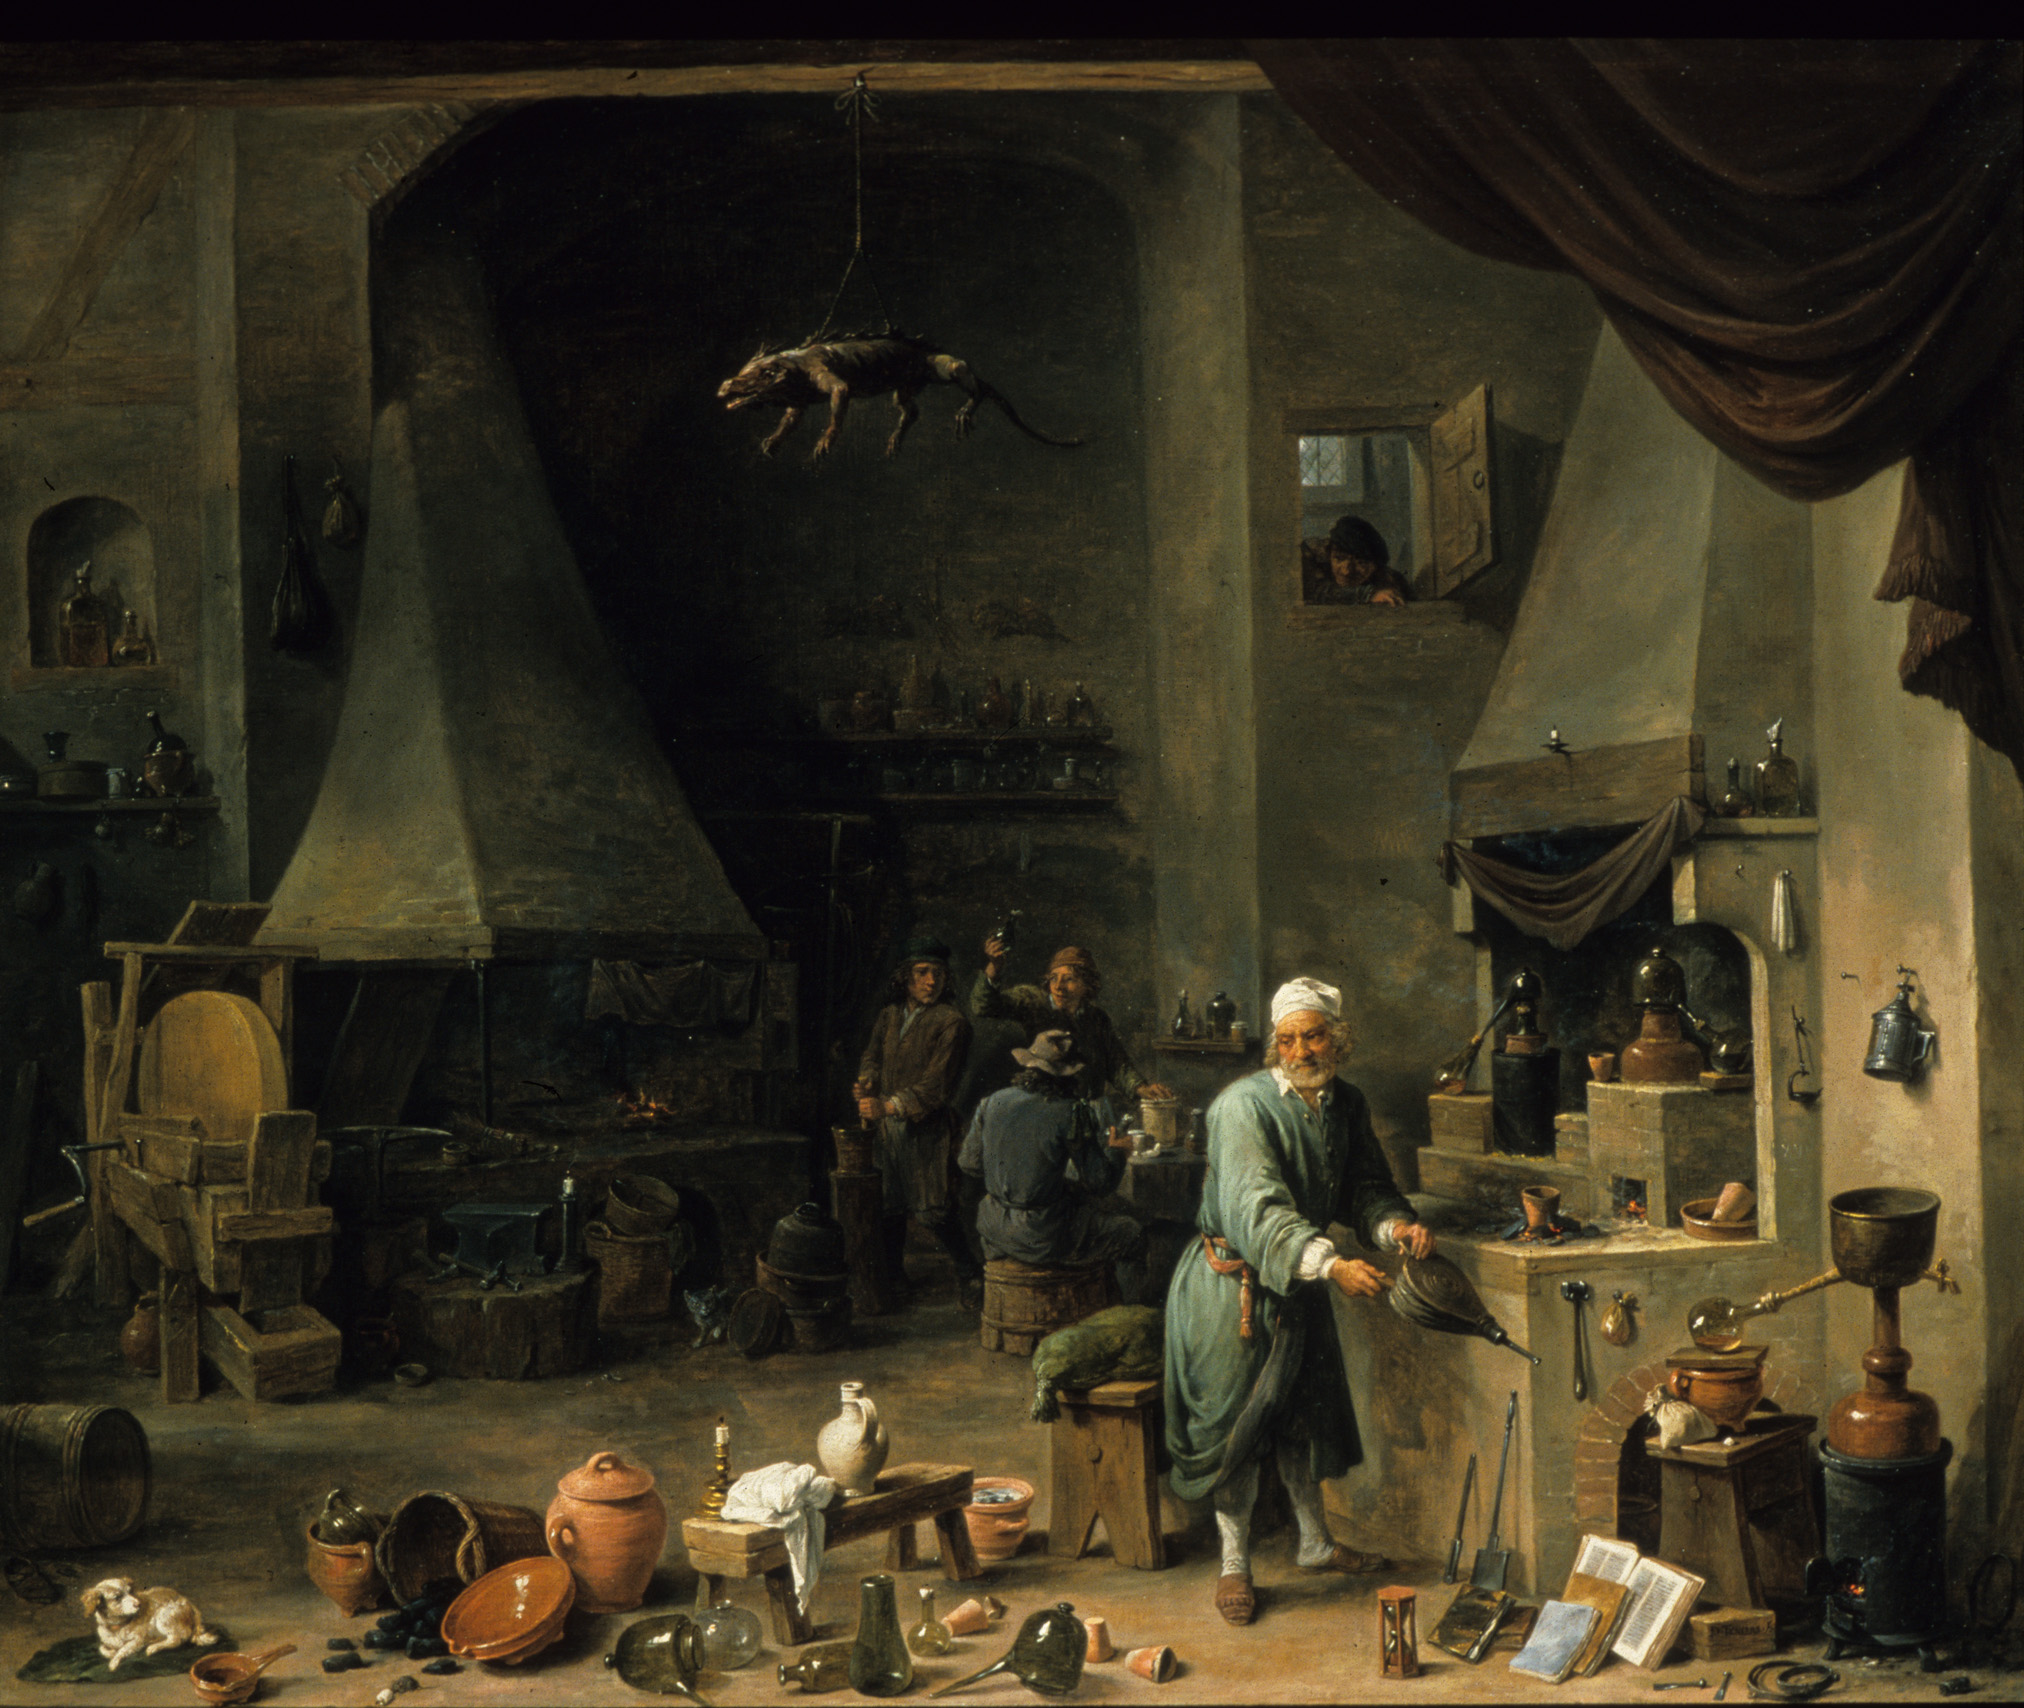 David Teniers the Younger’s painting The Alchemist in His Laboratory depicts an alchemist billowing the flames of his stove; the floor of his workspace is littered with empty vessels.